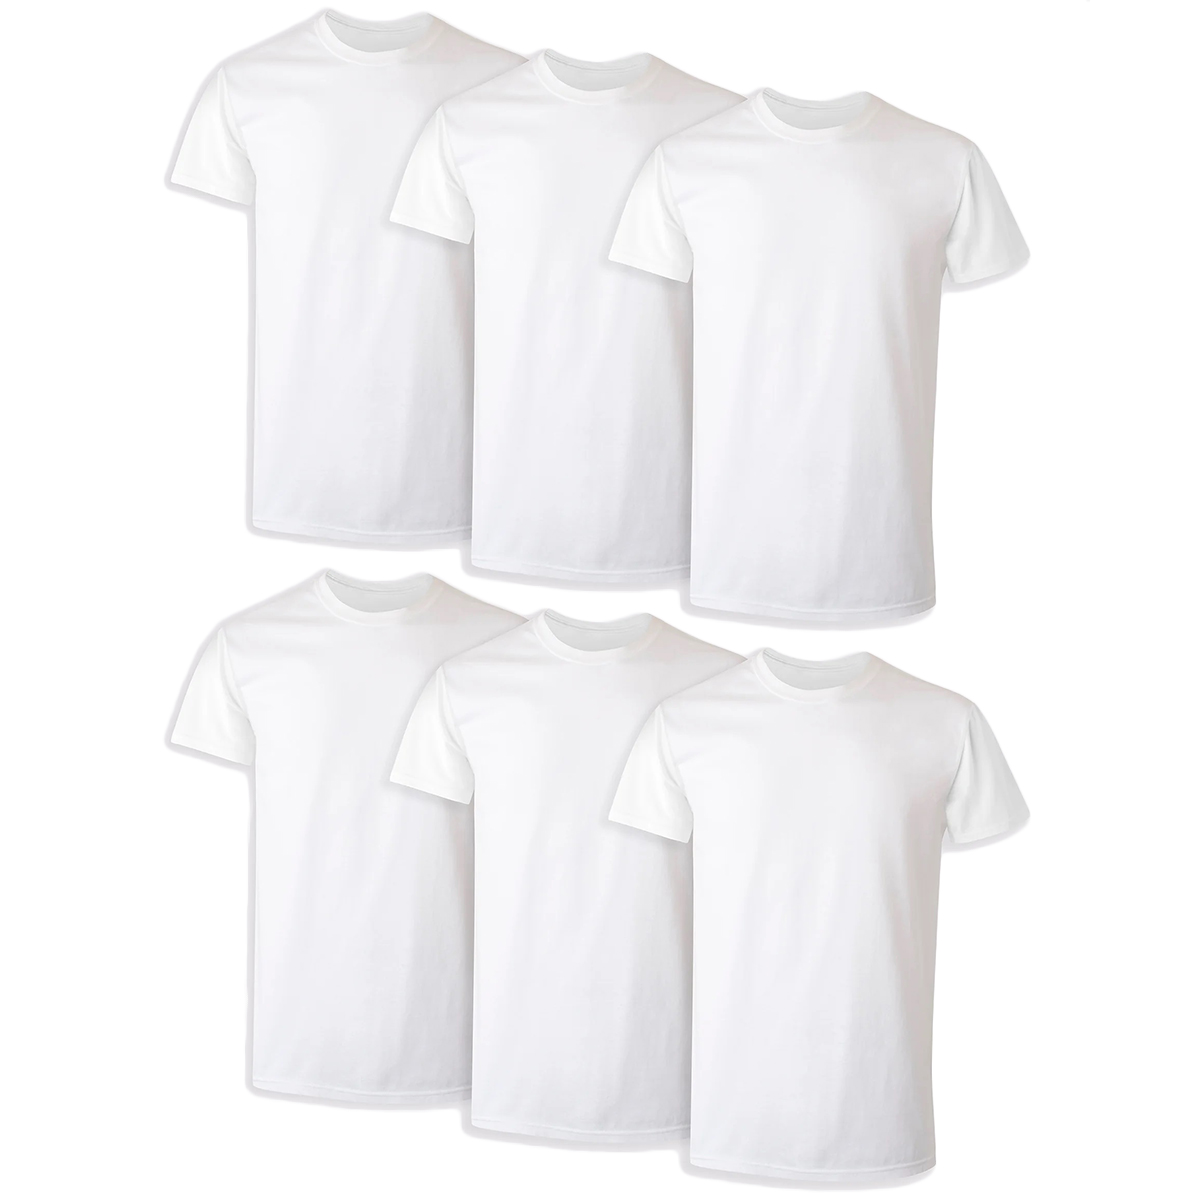 Hanes Ultimate Men's Comfortsoft Freshiq Crewneck Tees, 6-Pack Extended Size, White